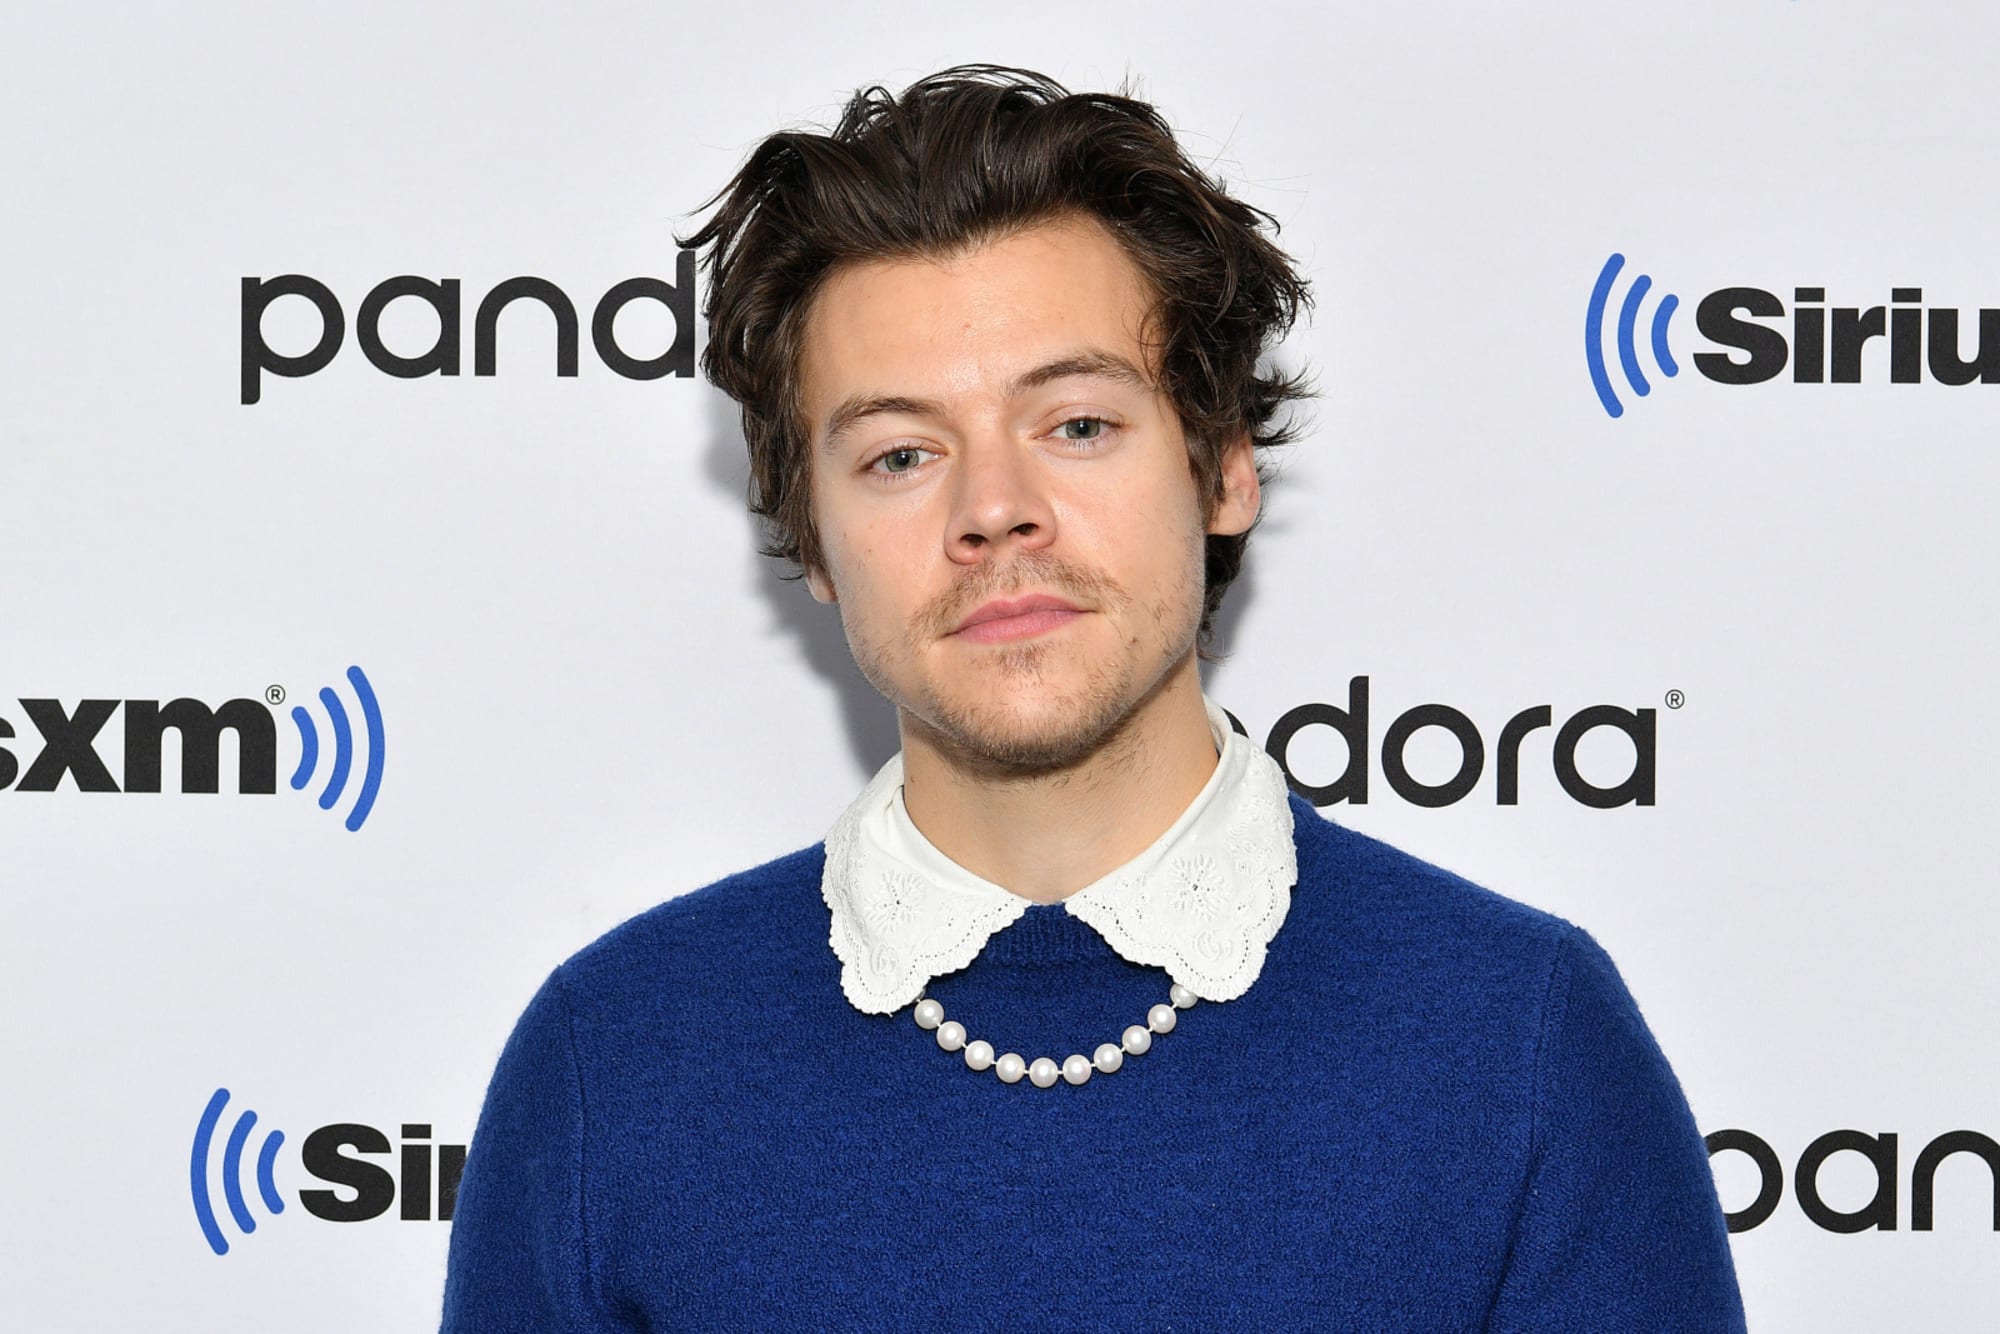 Stunning image of Harry Styles as Starfox circulated the internet before  Eternals casting rumors